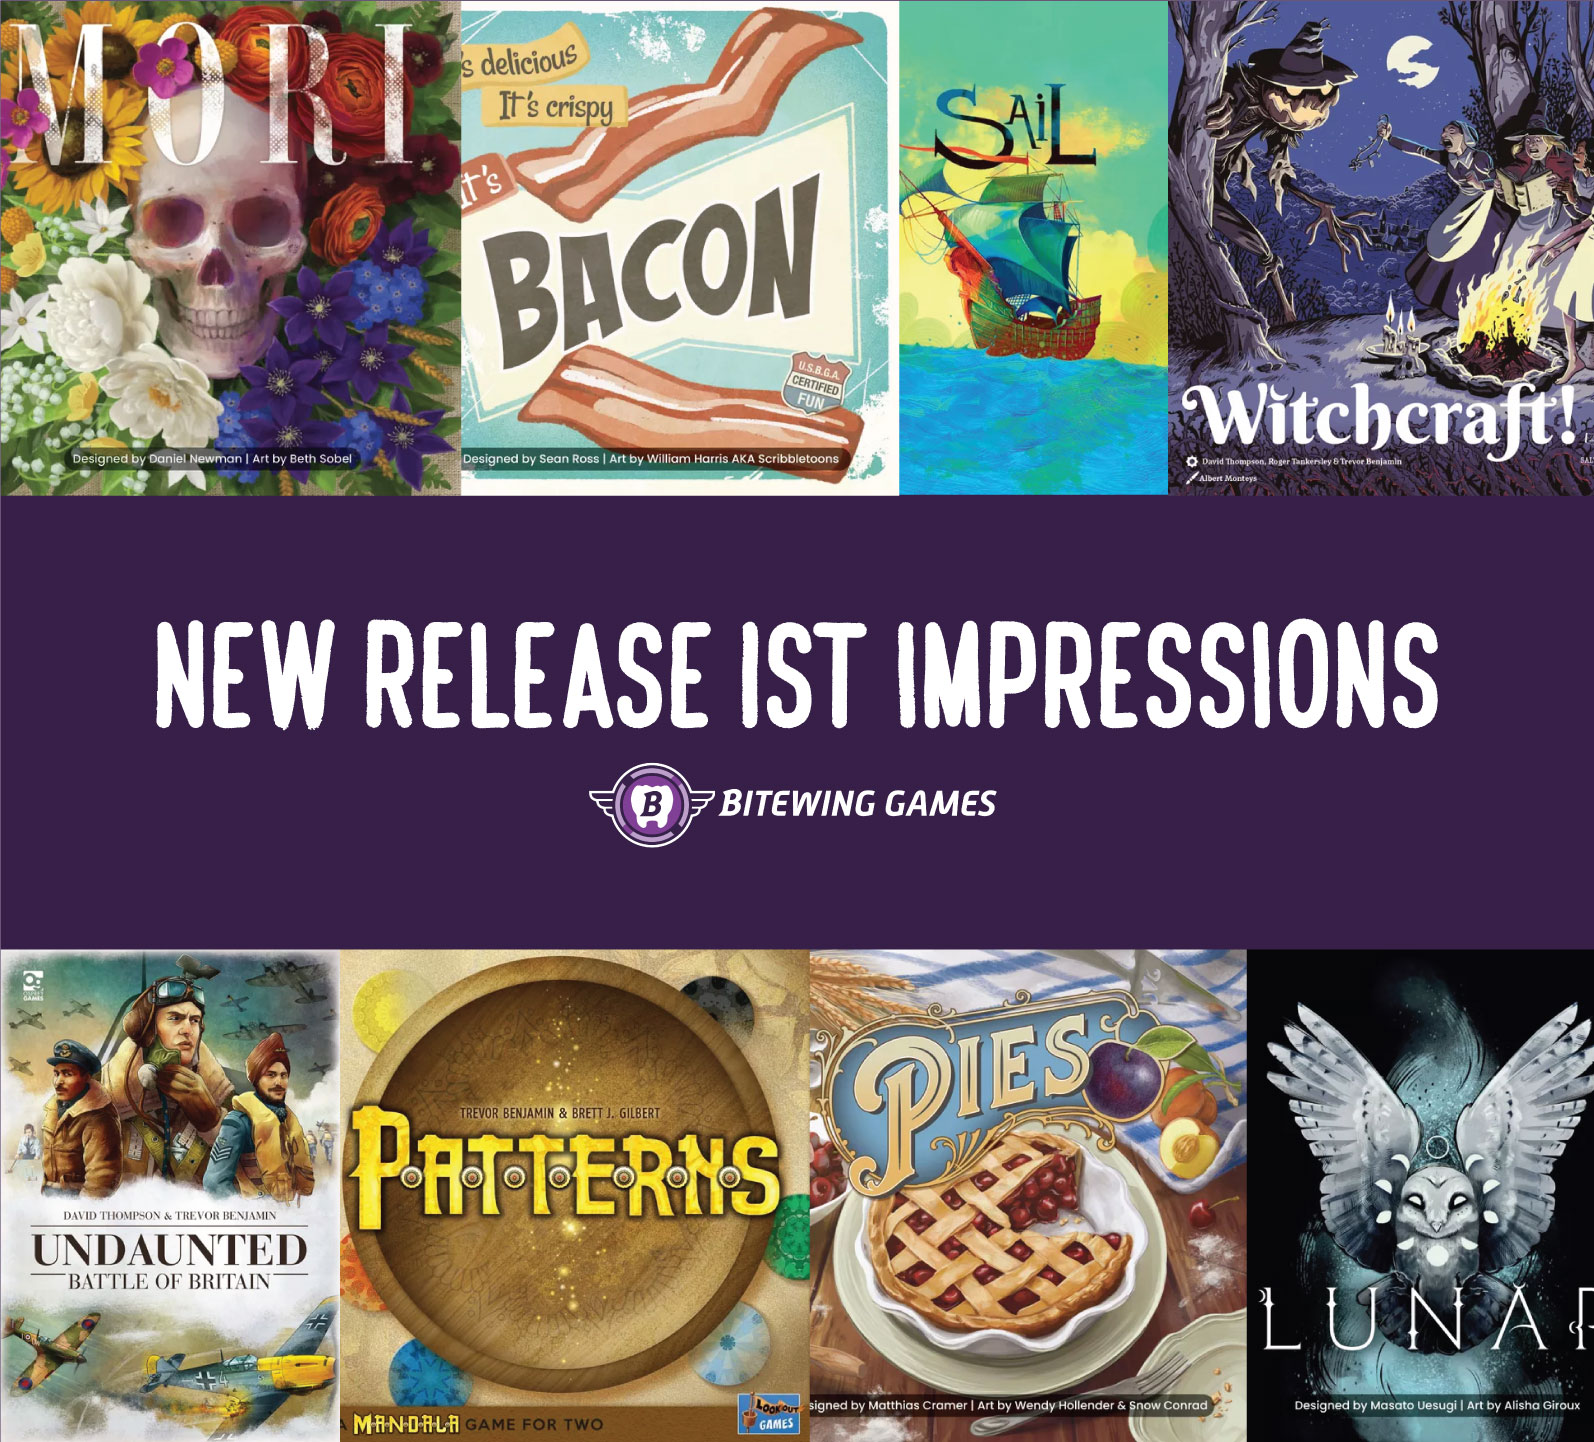 1st Impressions of Sail, Witchcraft, Undaunted: Battle of Britain, Patterns, Bacon, Lunar, Mori, and Pies!